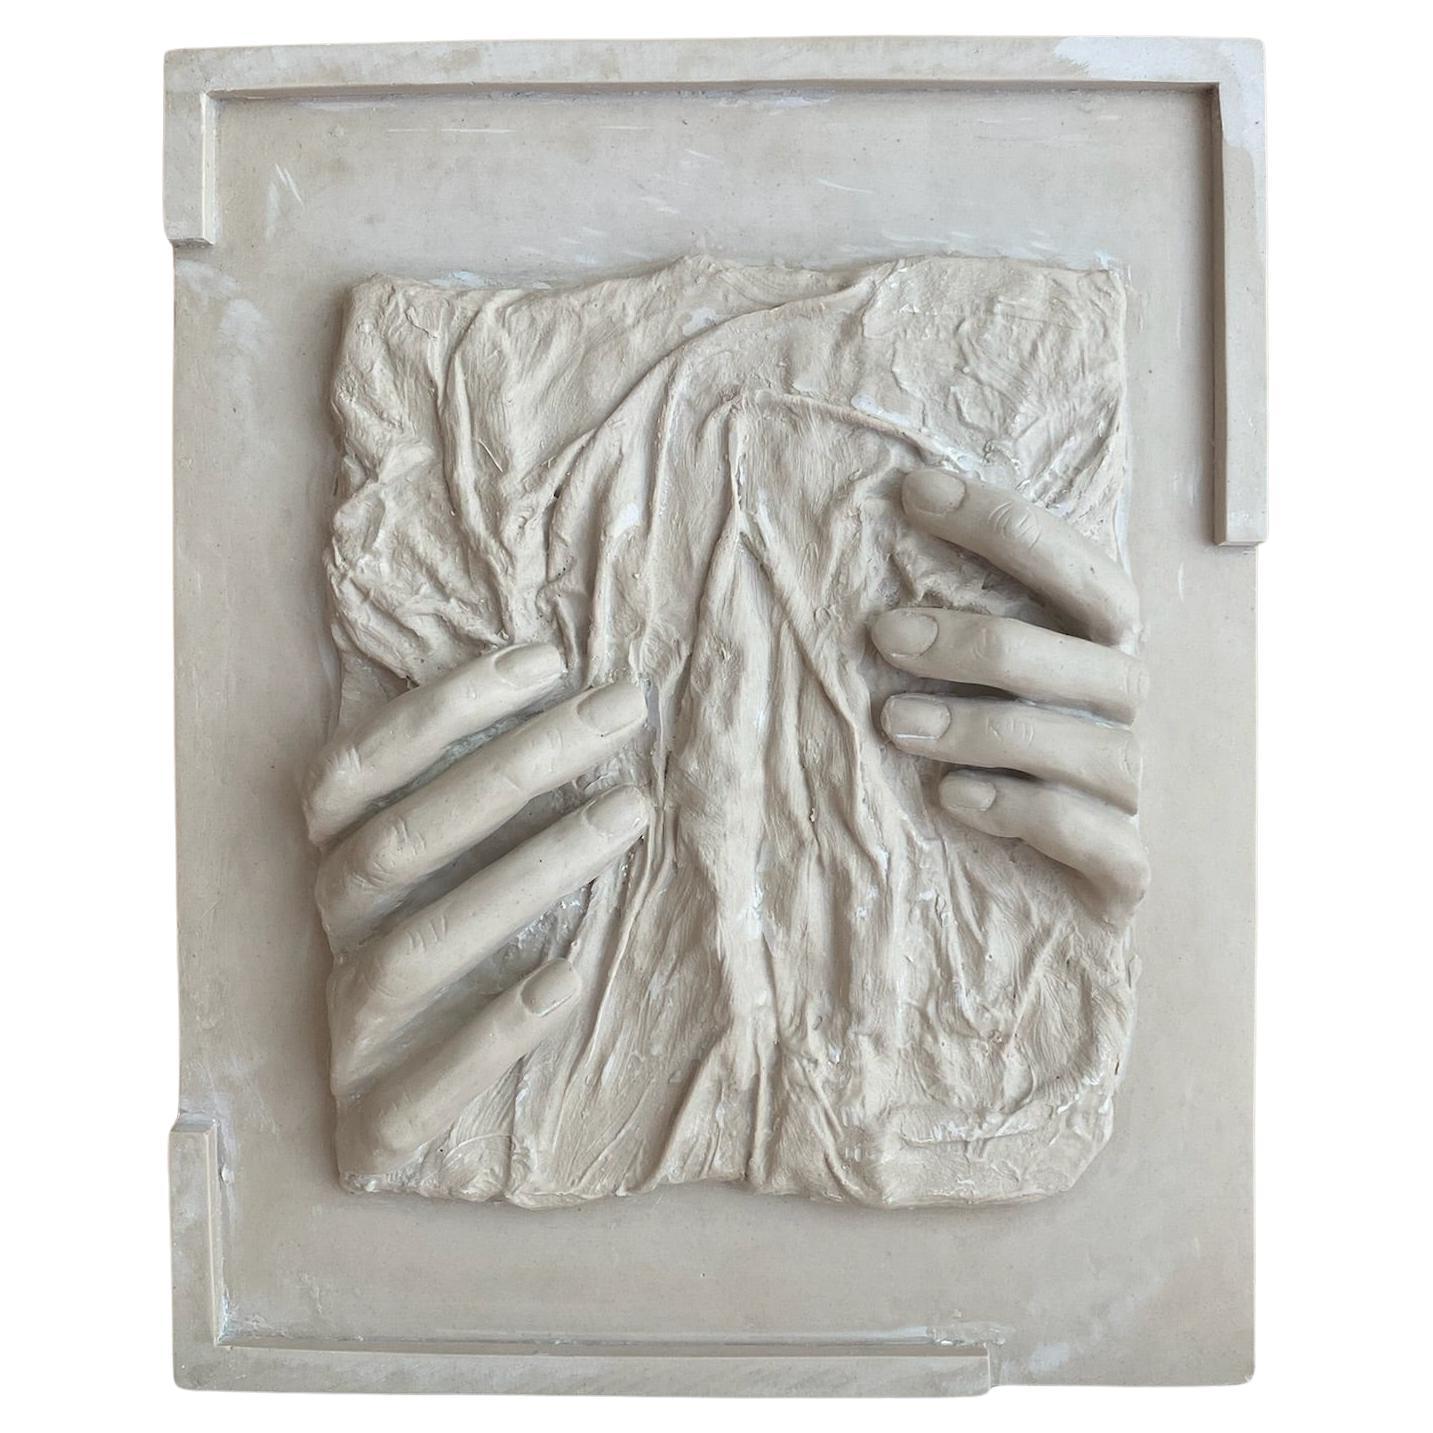 Marcela Cure Hands Wall Art Sculpture Resin and Stone - Number 22